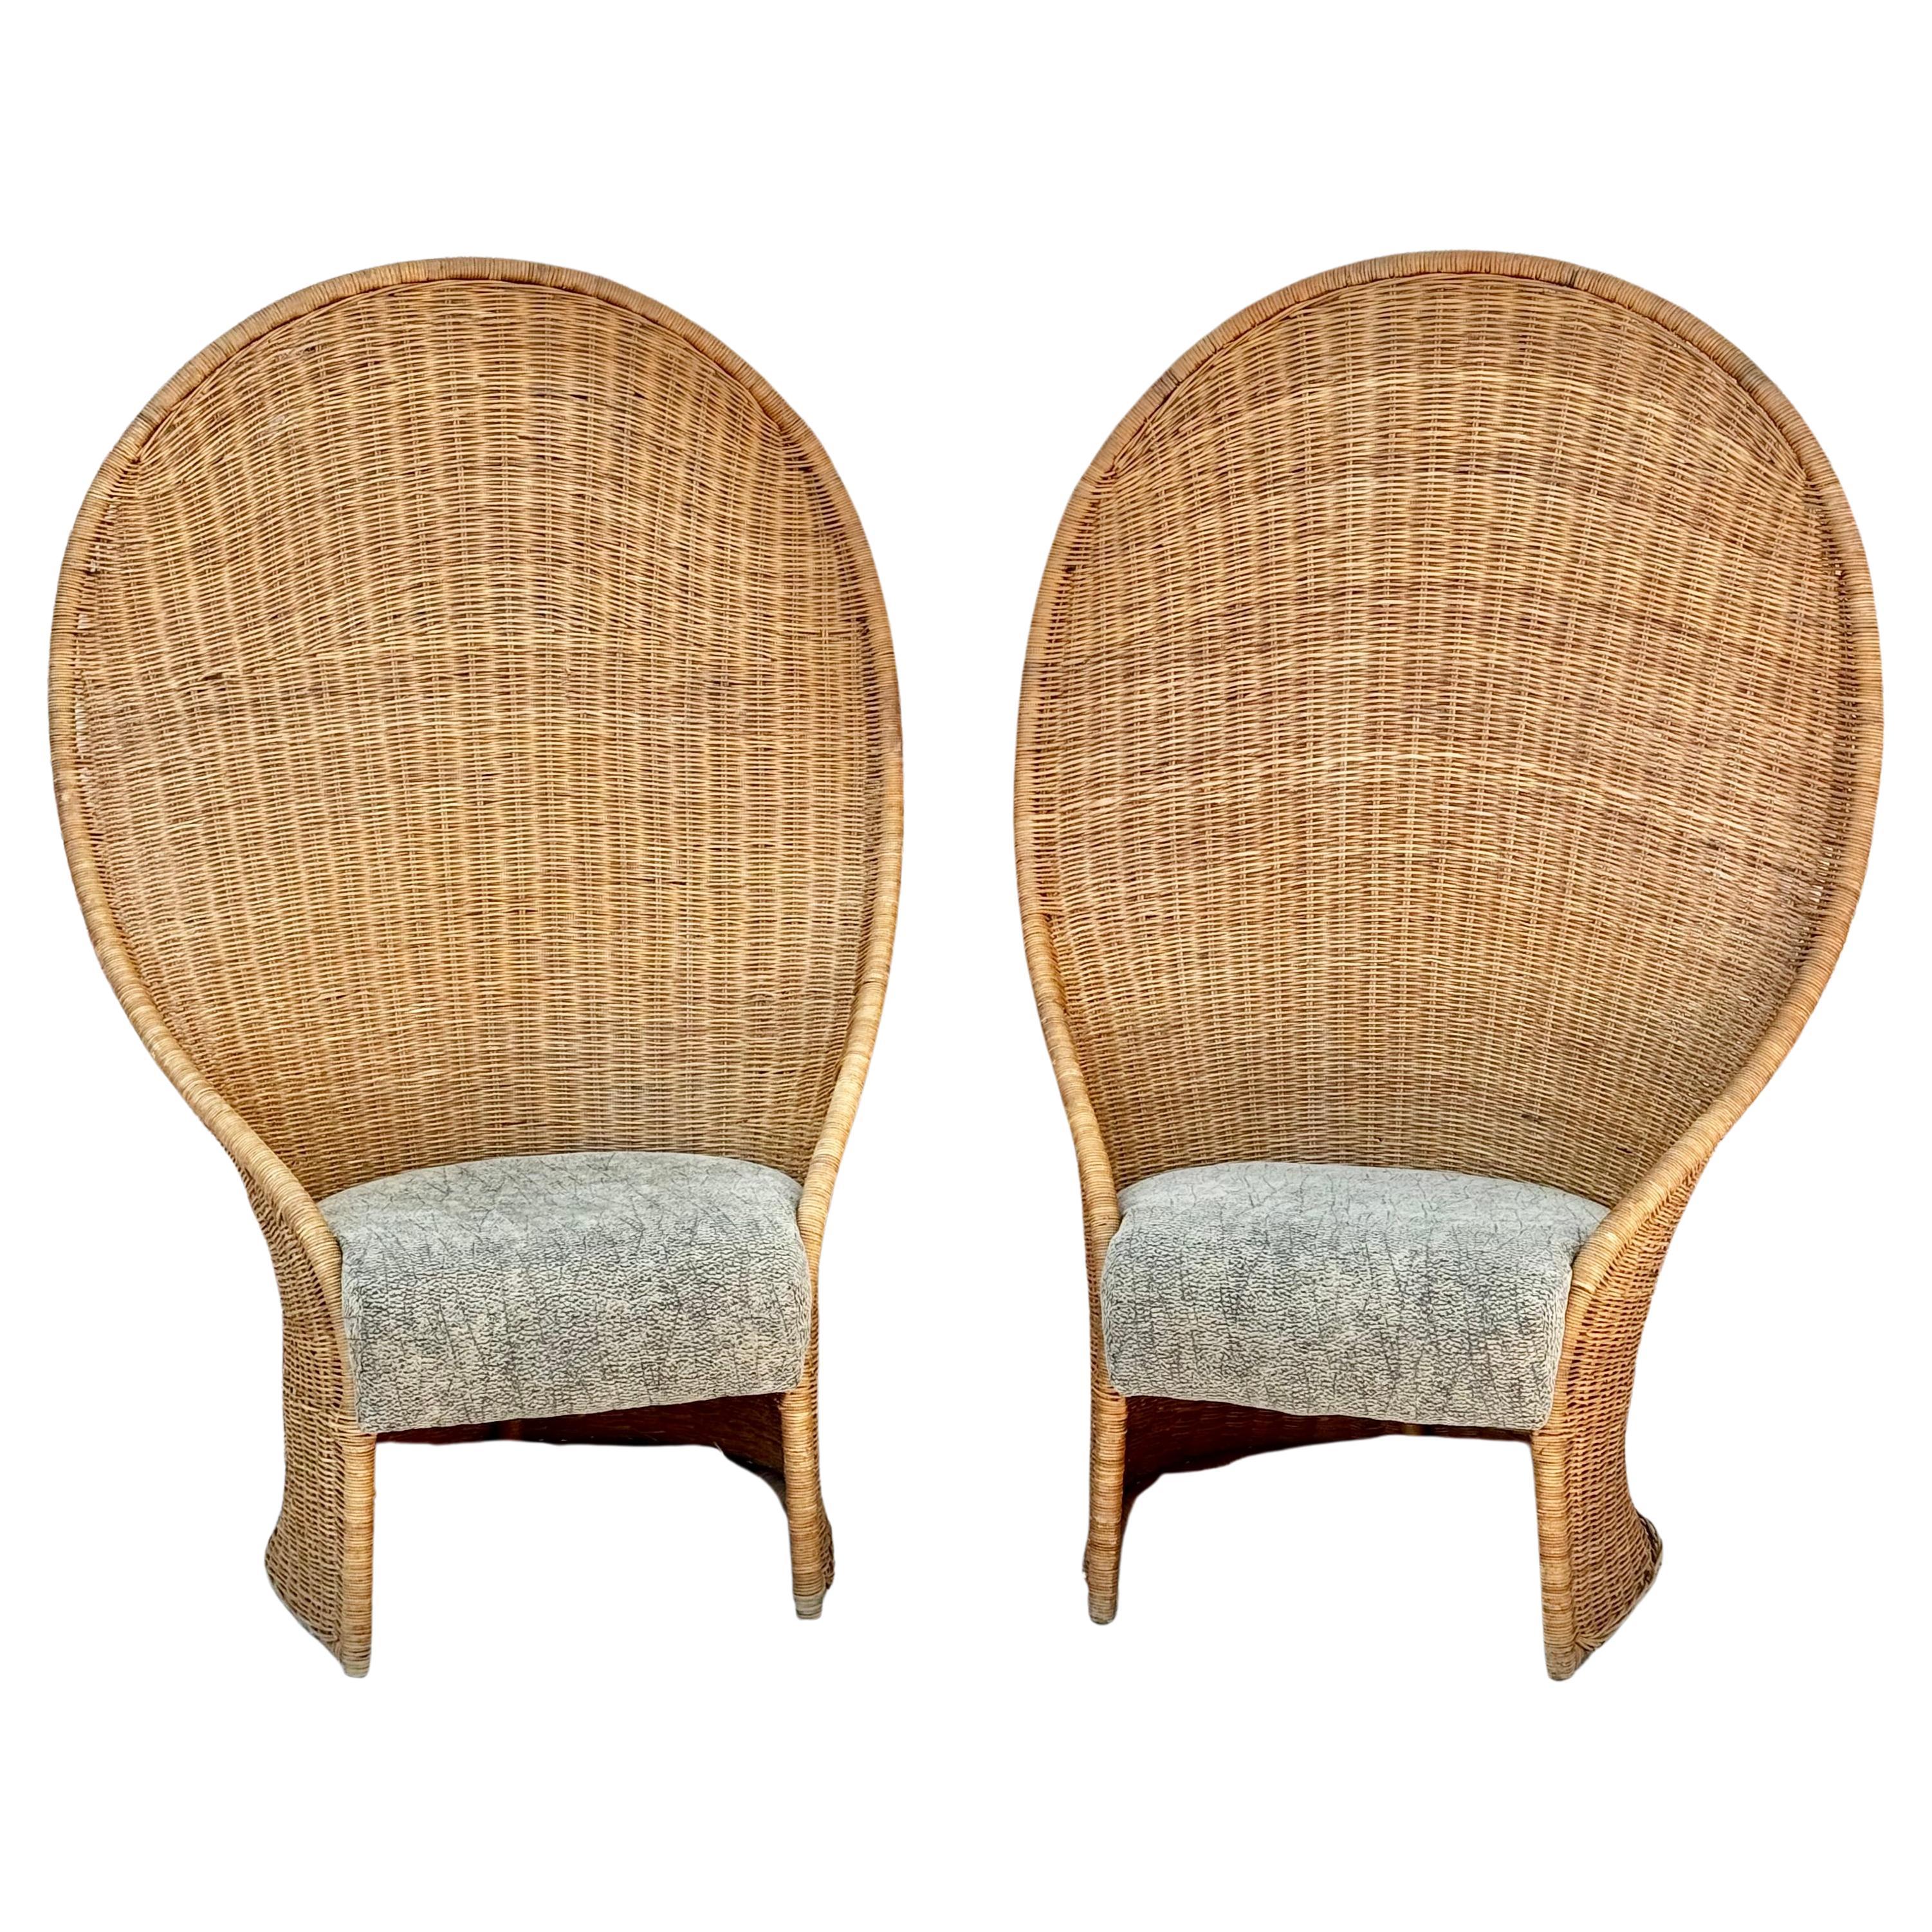 Pair Of Mid-Century Modern Tall Rattan Wicker Peacock Chairs